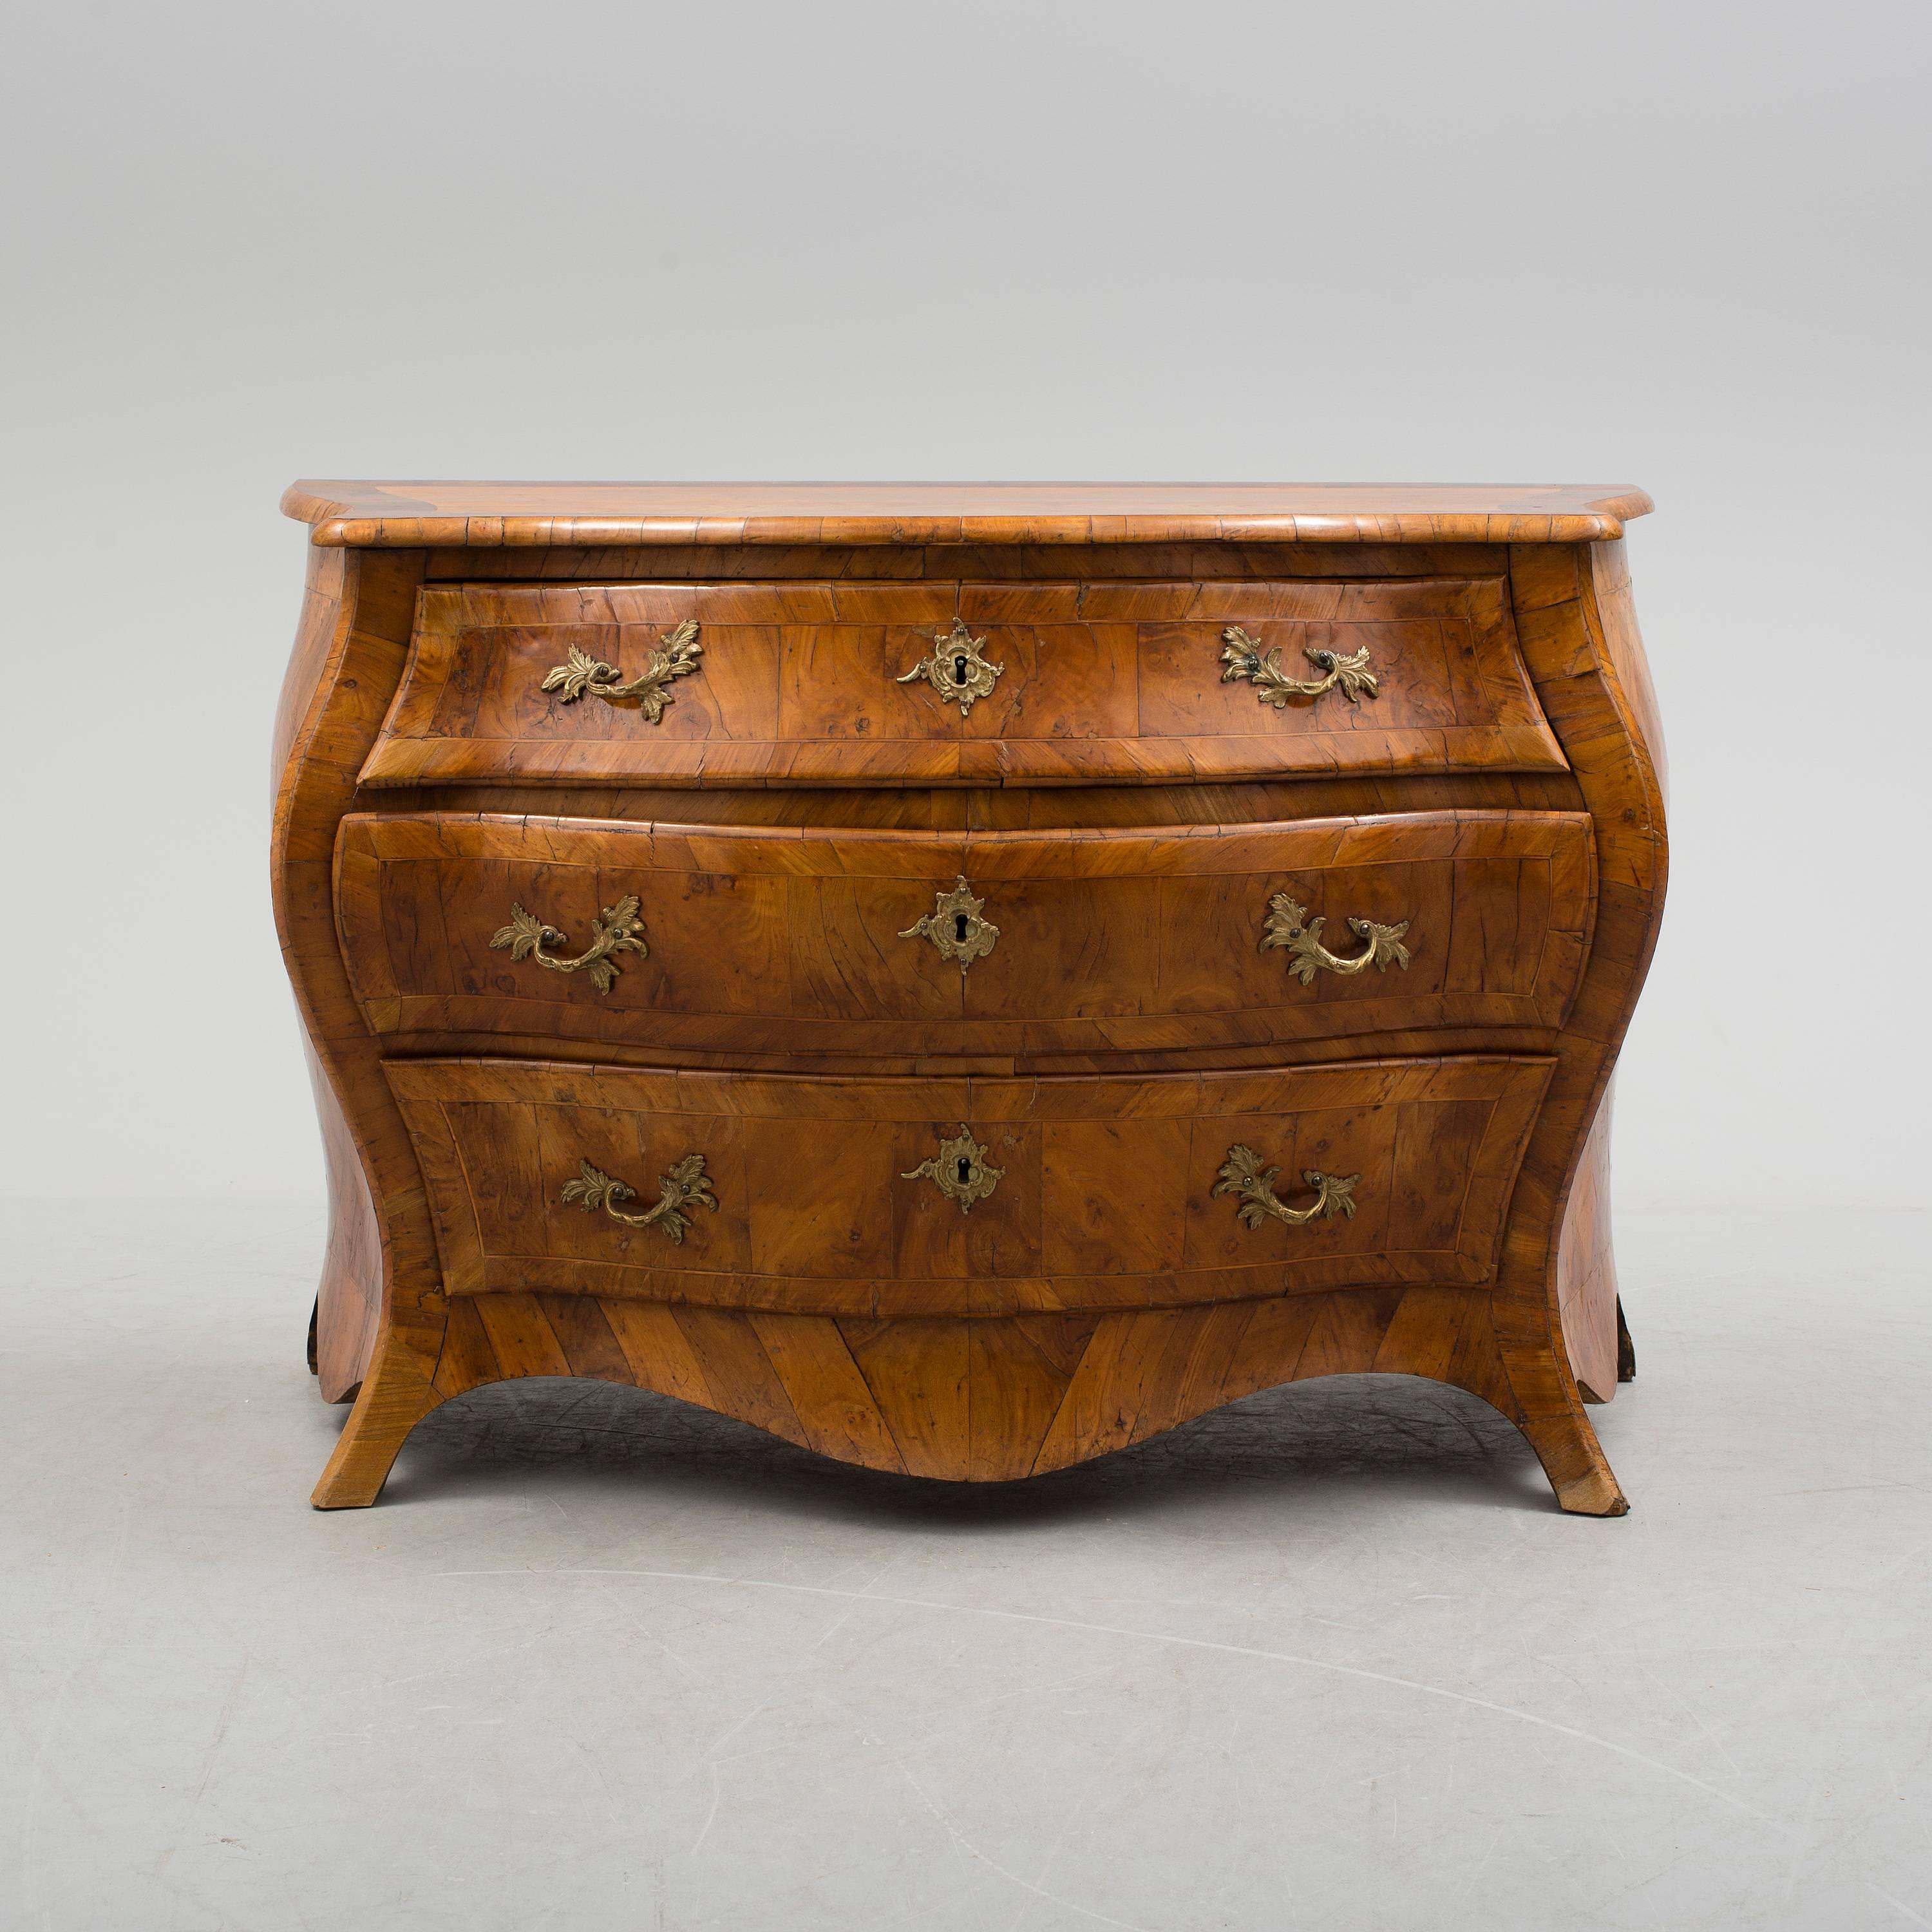 Swedish Rococo restored with complementary additions such as veneer and occasional minor parts at drawers and body. Wear, slight loss of veneer. Drycracks. The bronzes and locks are original, key included.